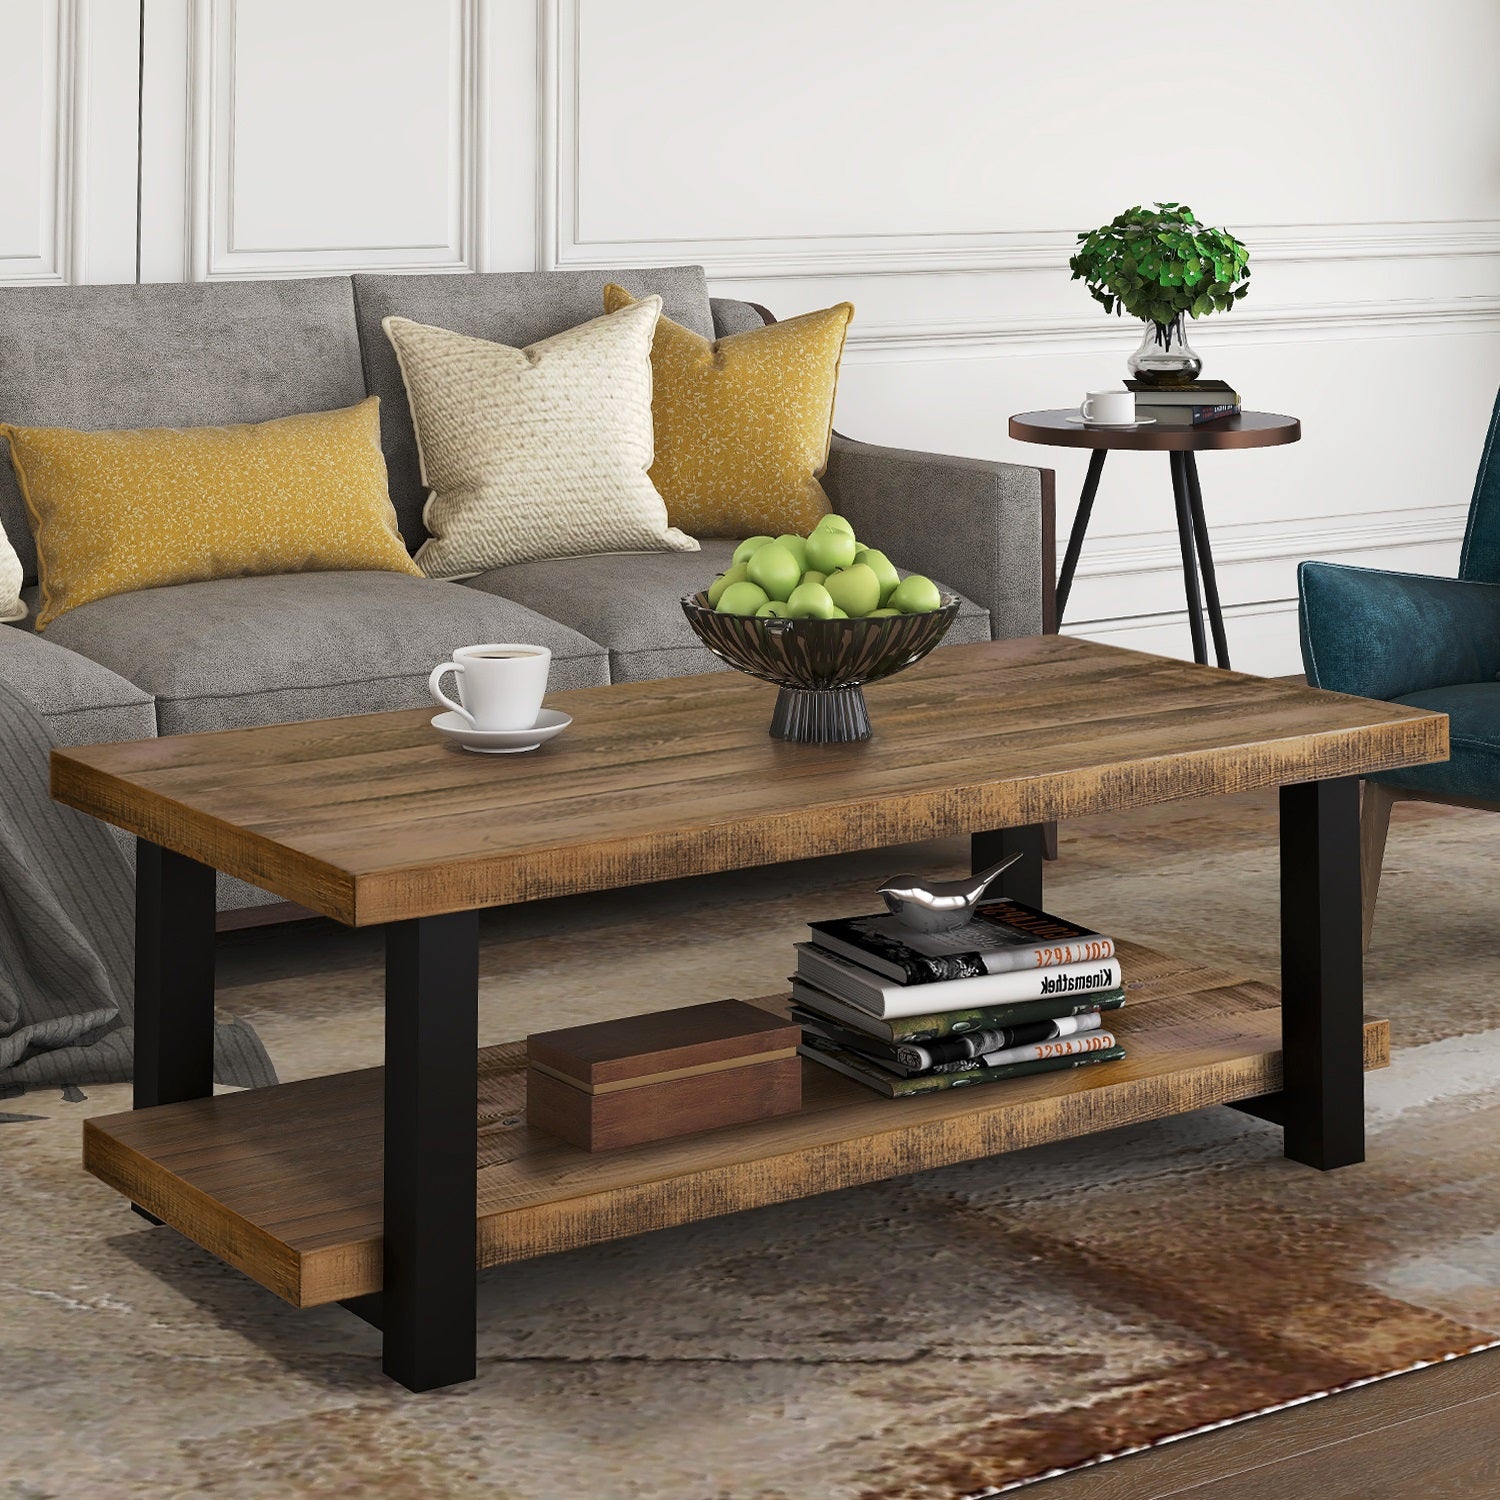 Rustic Natural Coffee Table with Storage Shelf for Living Room